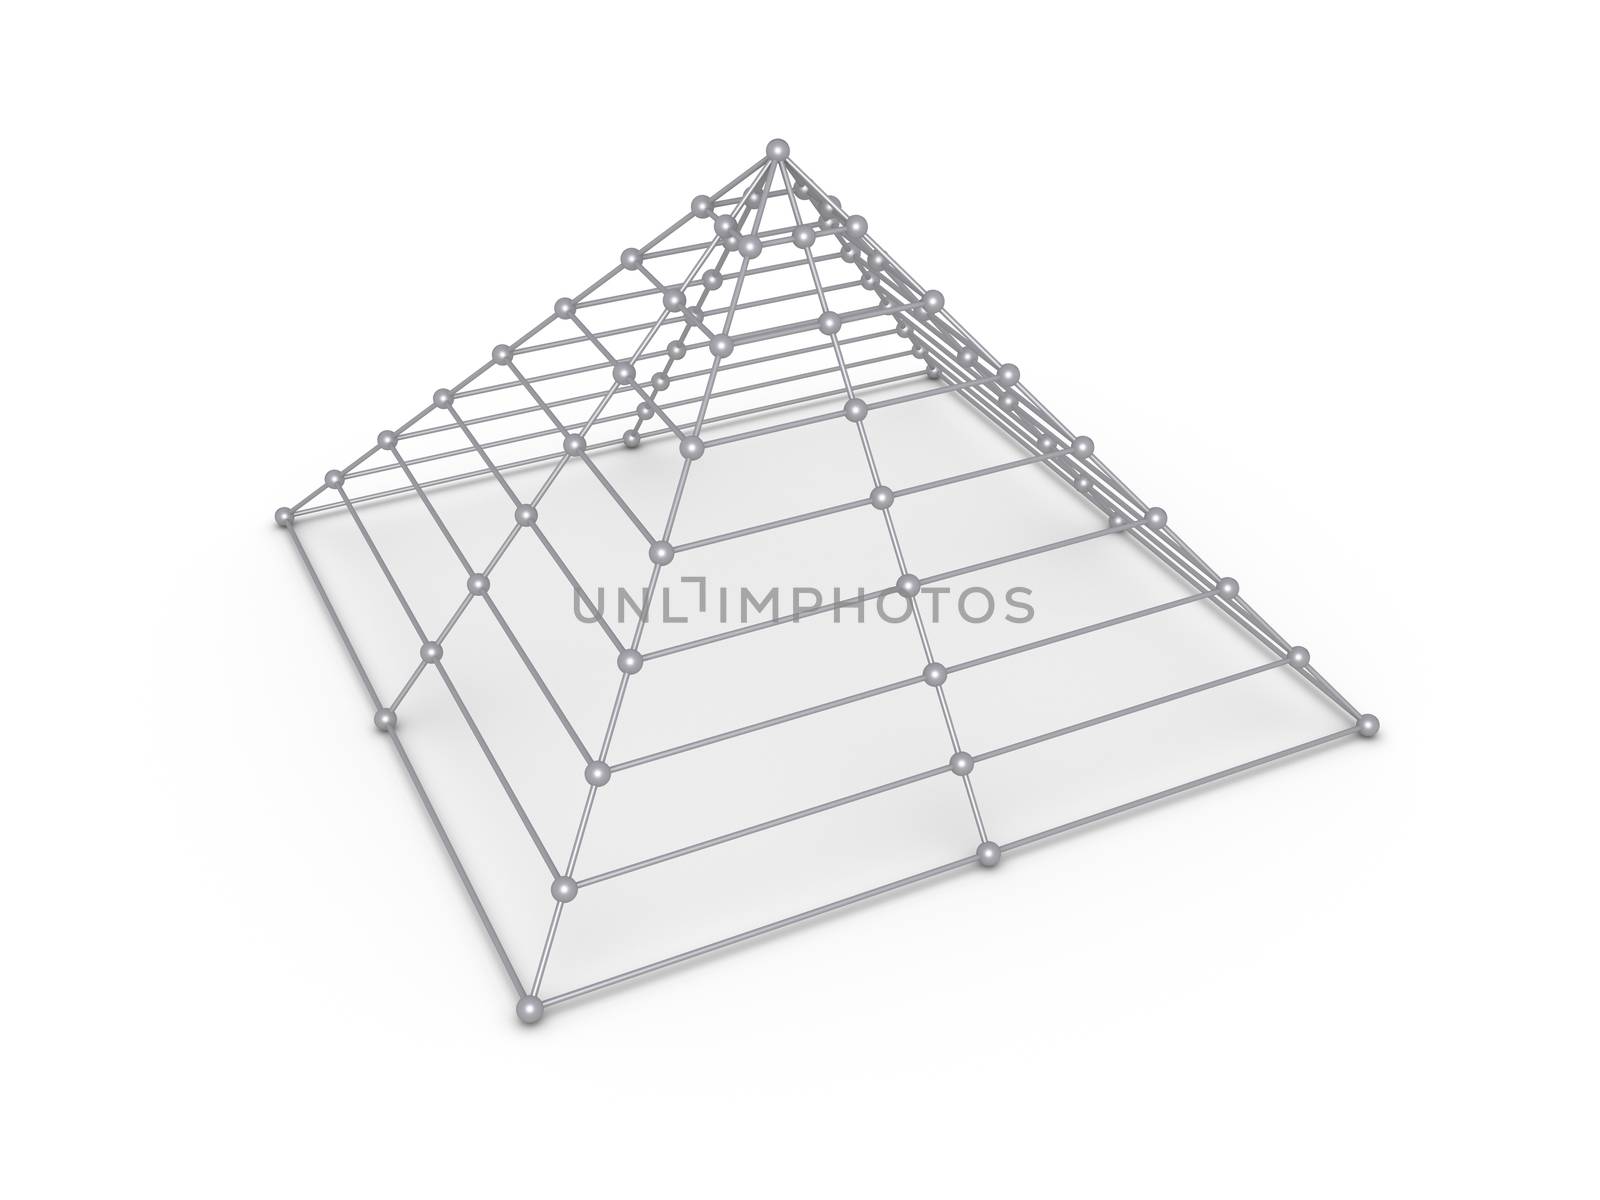 Pyramid construction made of spheres and cylinders